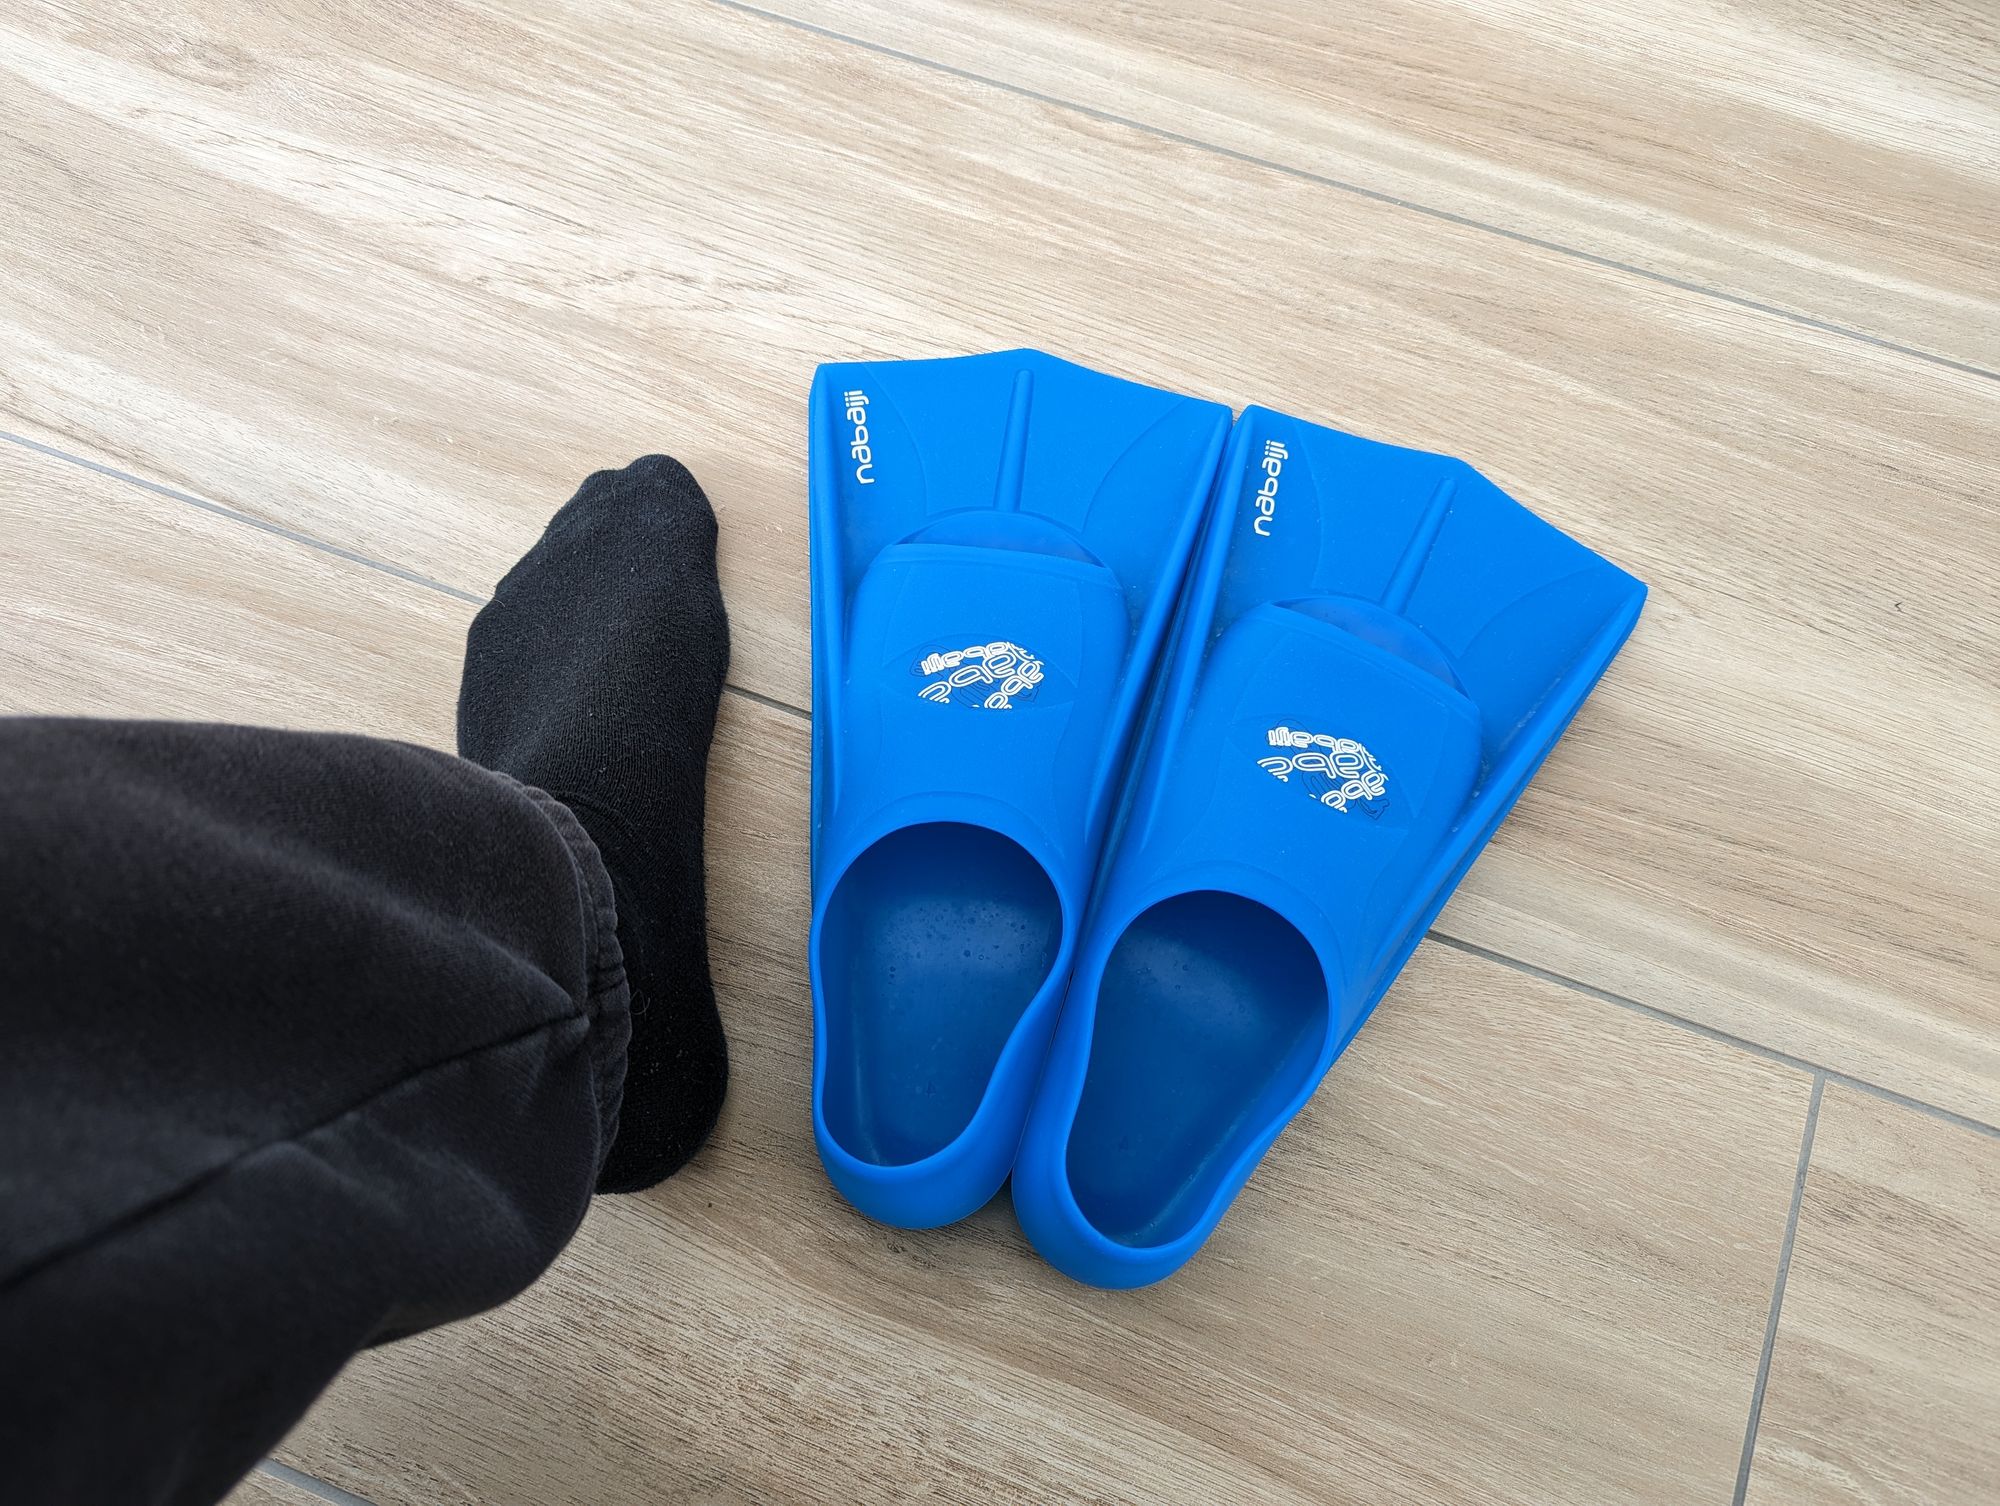 Short fins for your feet. 